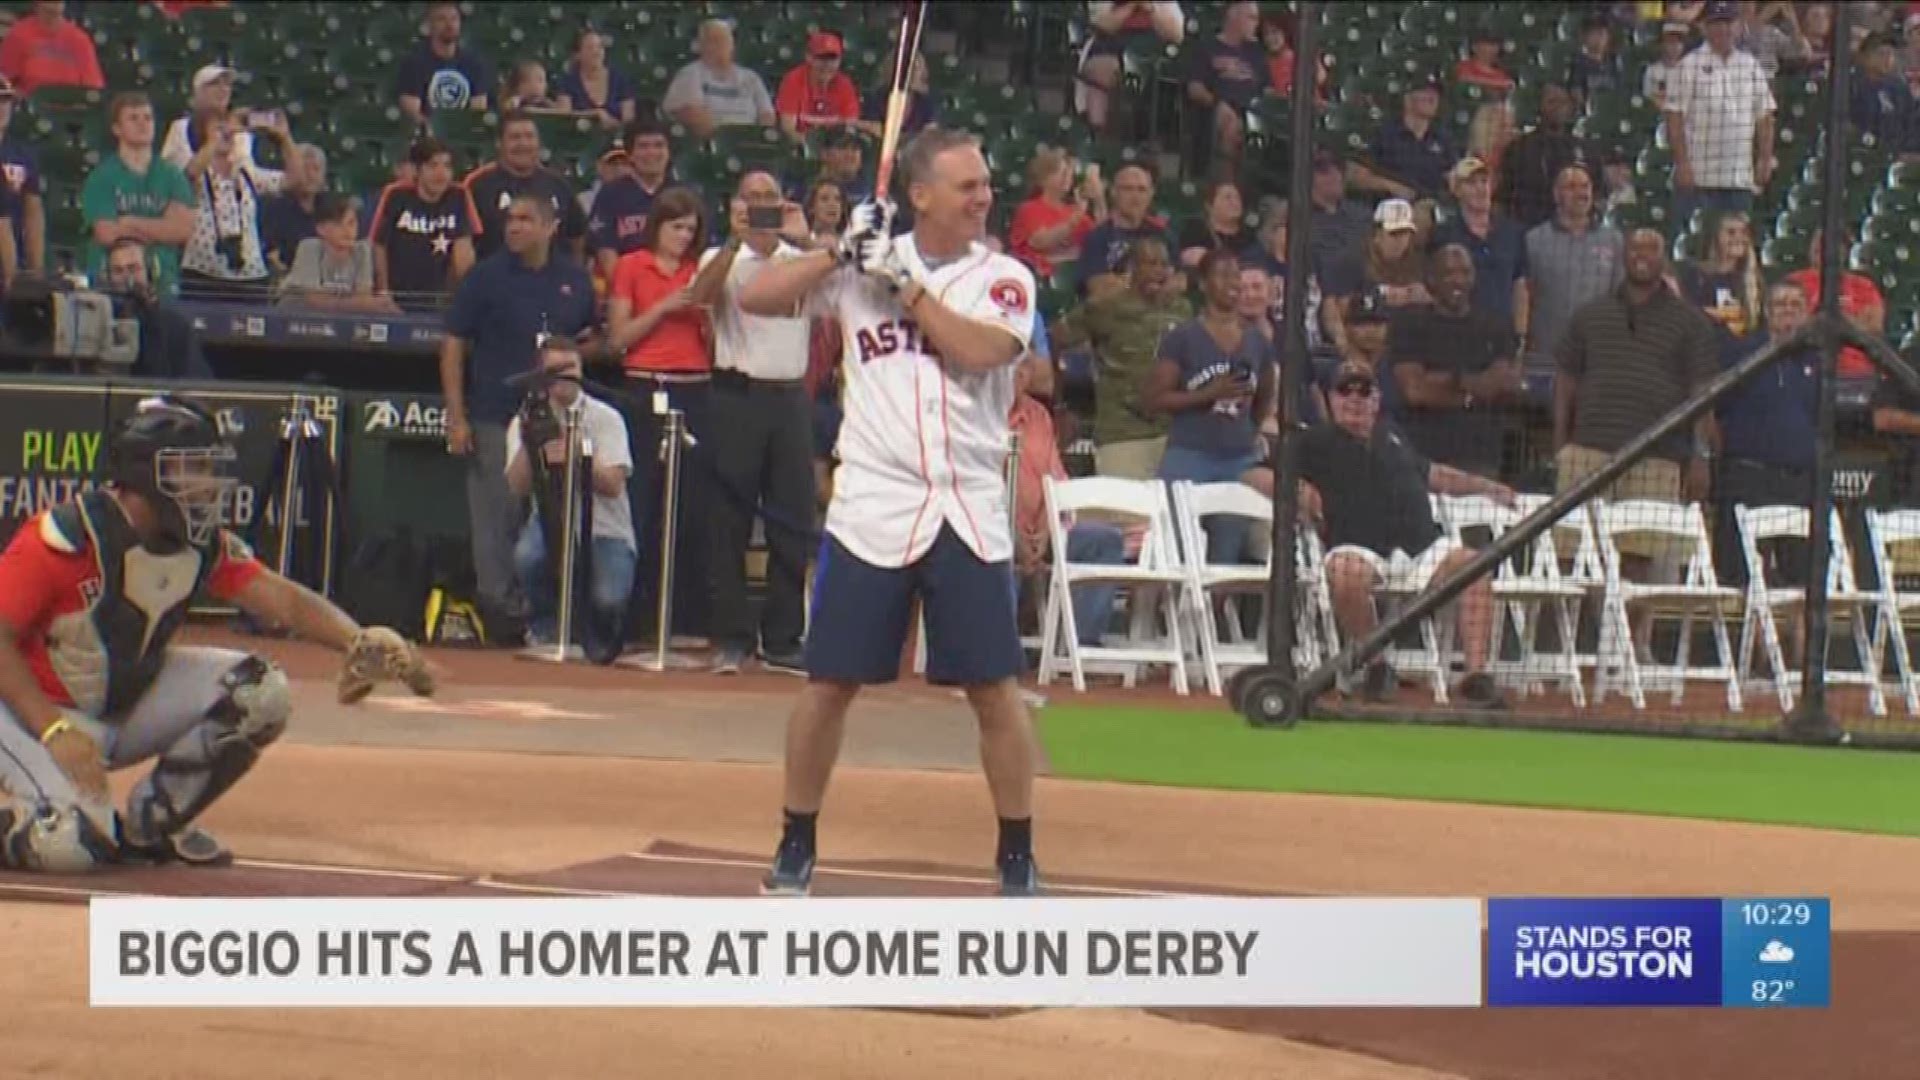 In looking at the video from Minute Maid Park Sunday afternoon, some may think they're dreaming or the video's got to be file. But it really happened! Astros Legend and Hall of Famer Craig Biggio was back at the ballpark hitting home runs into the stands.